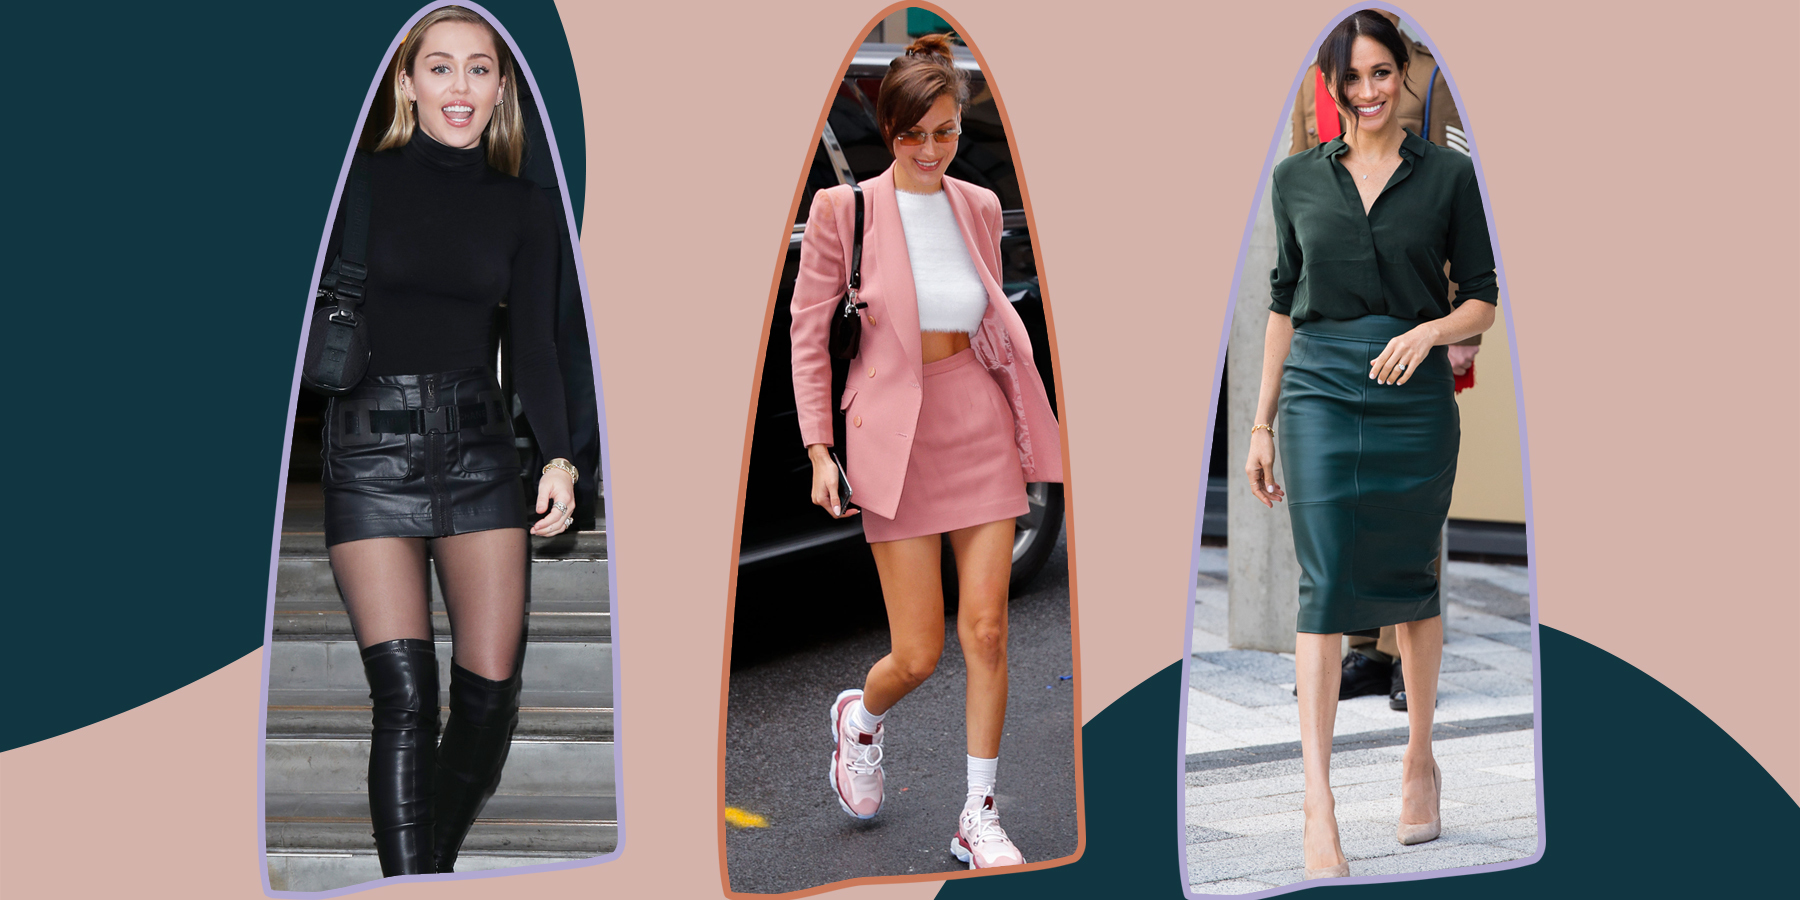 10 Skirt Outfits To Try: What To Wear With SkirtsHelloGiggles